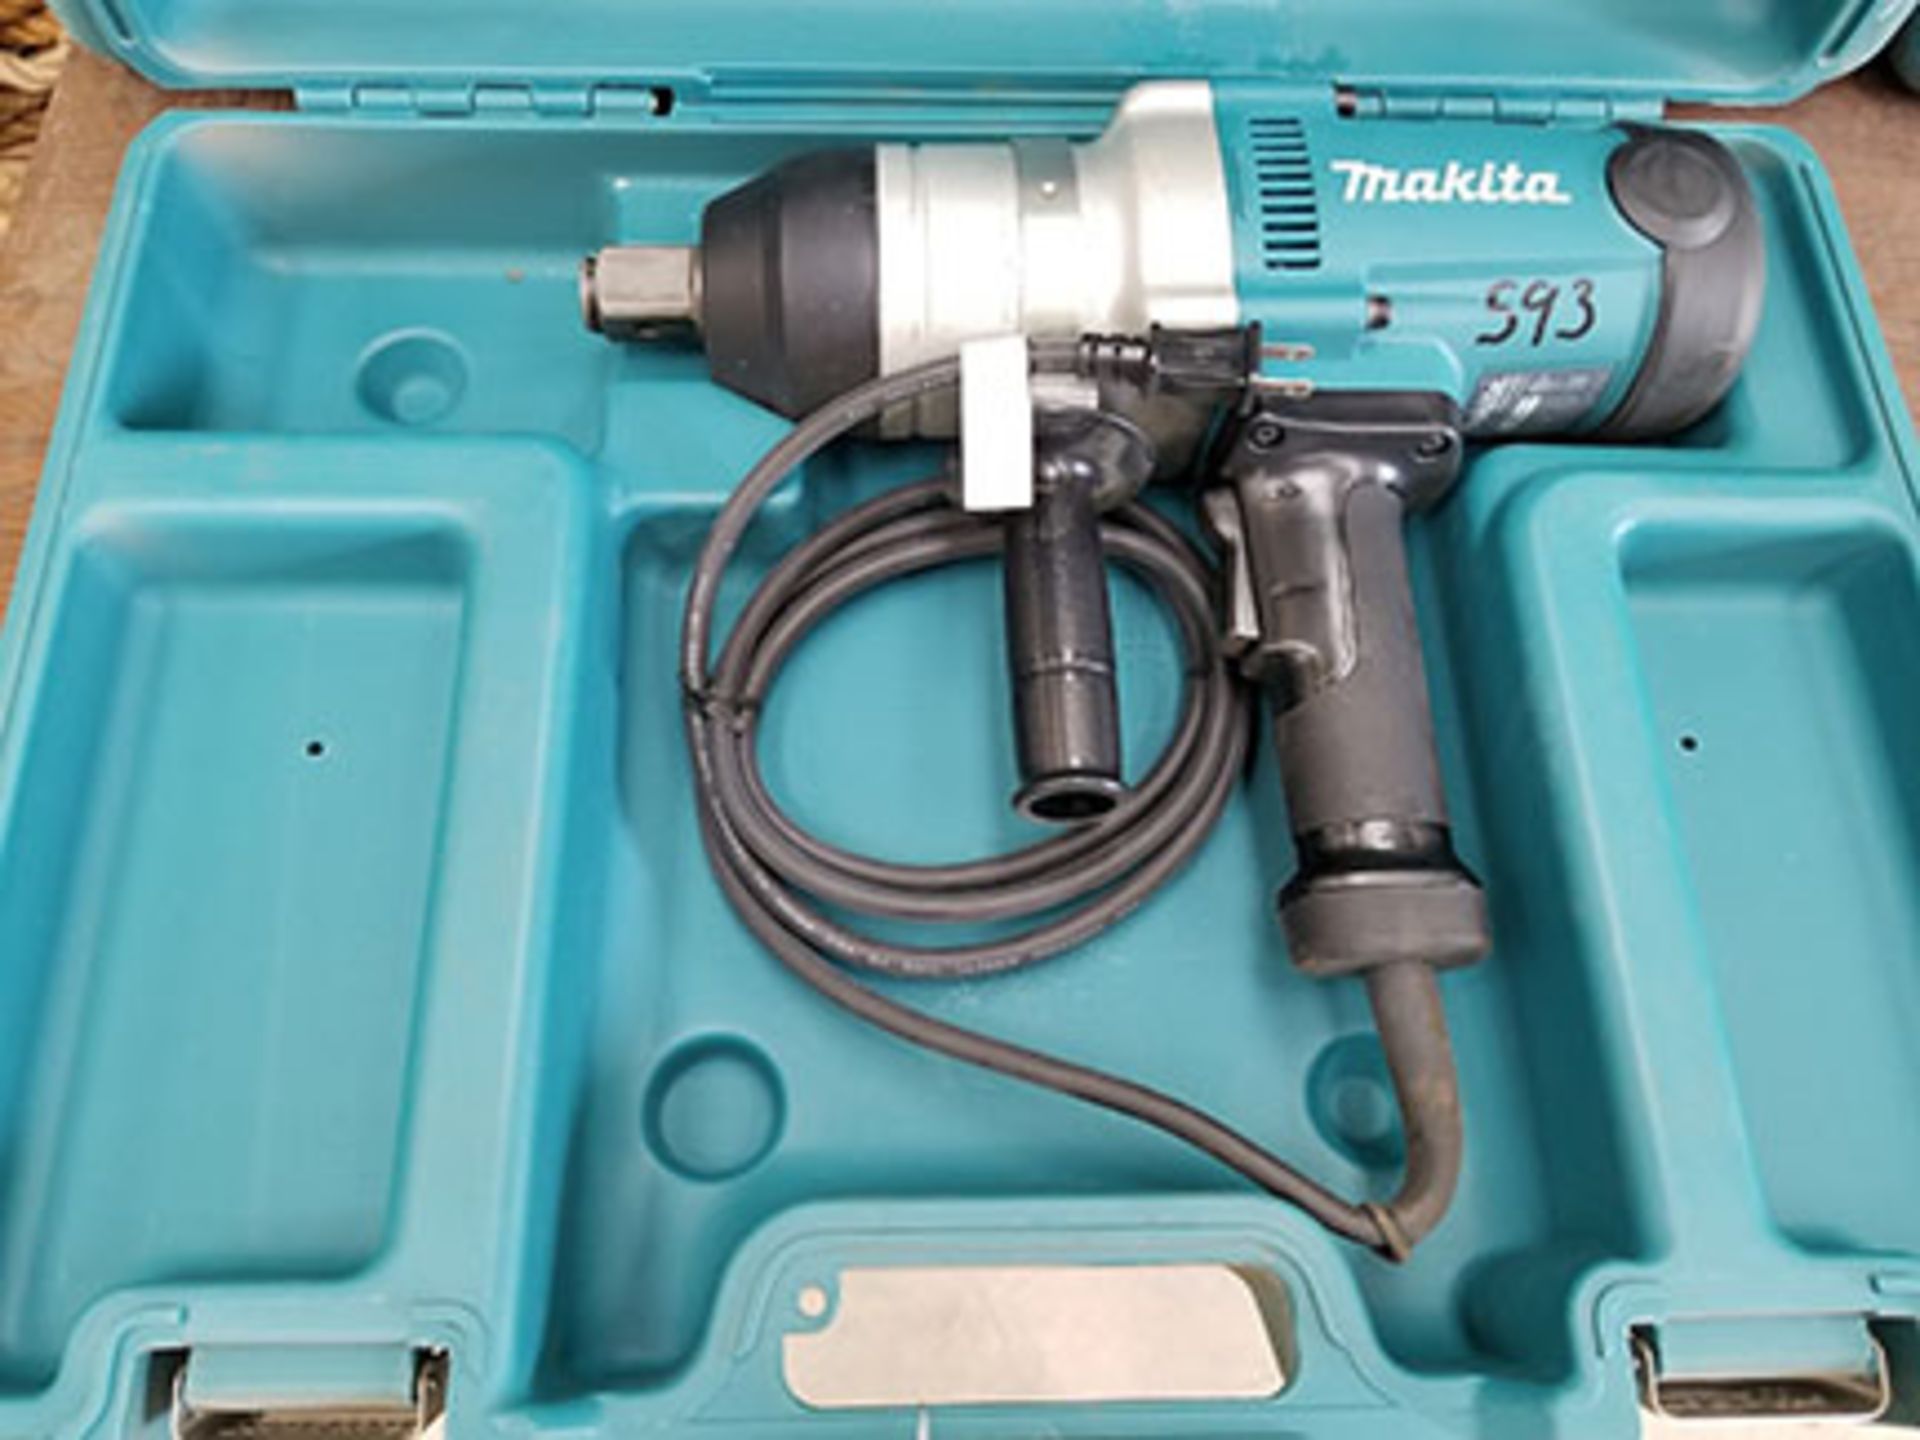 MAKITA TW1000 120V ELECTRIC IMPACT WRENCH, 1” DRIVE - Image 2 of 5